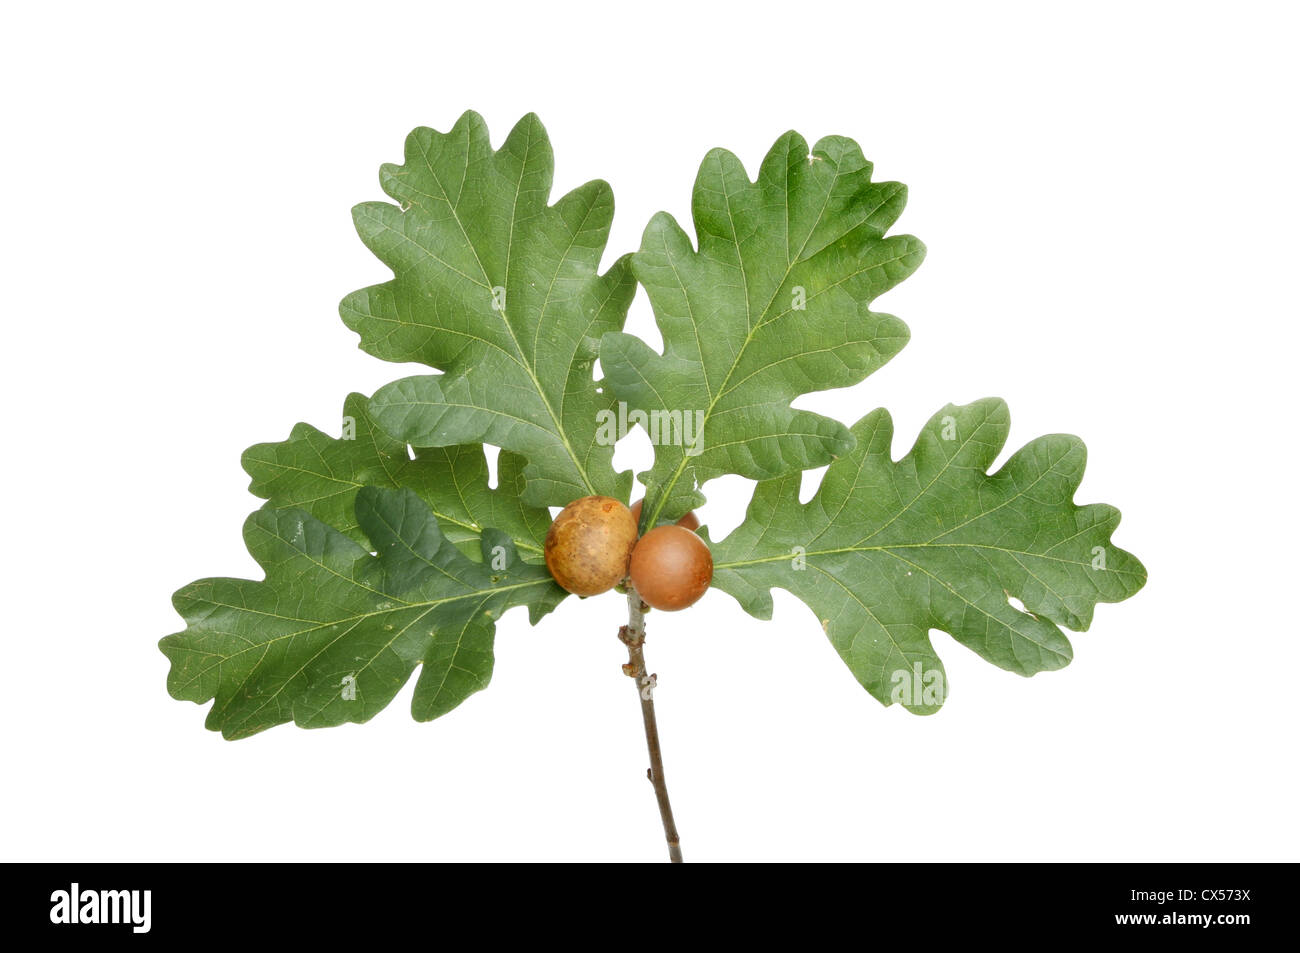 Oak leaves and oak apples isolated against white Stock Photo